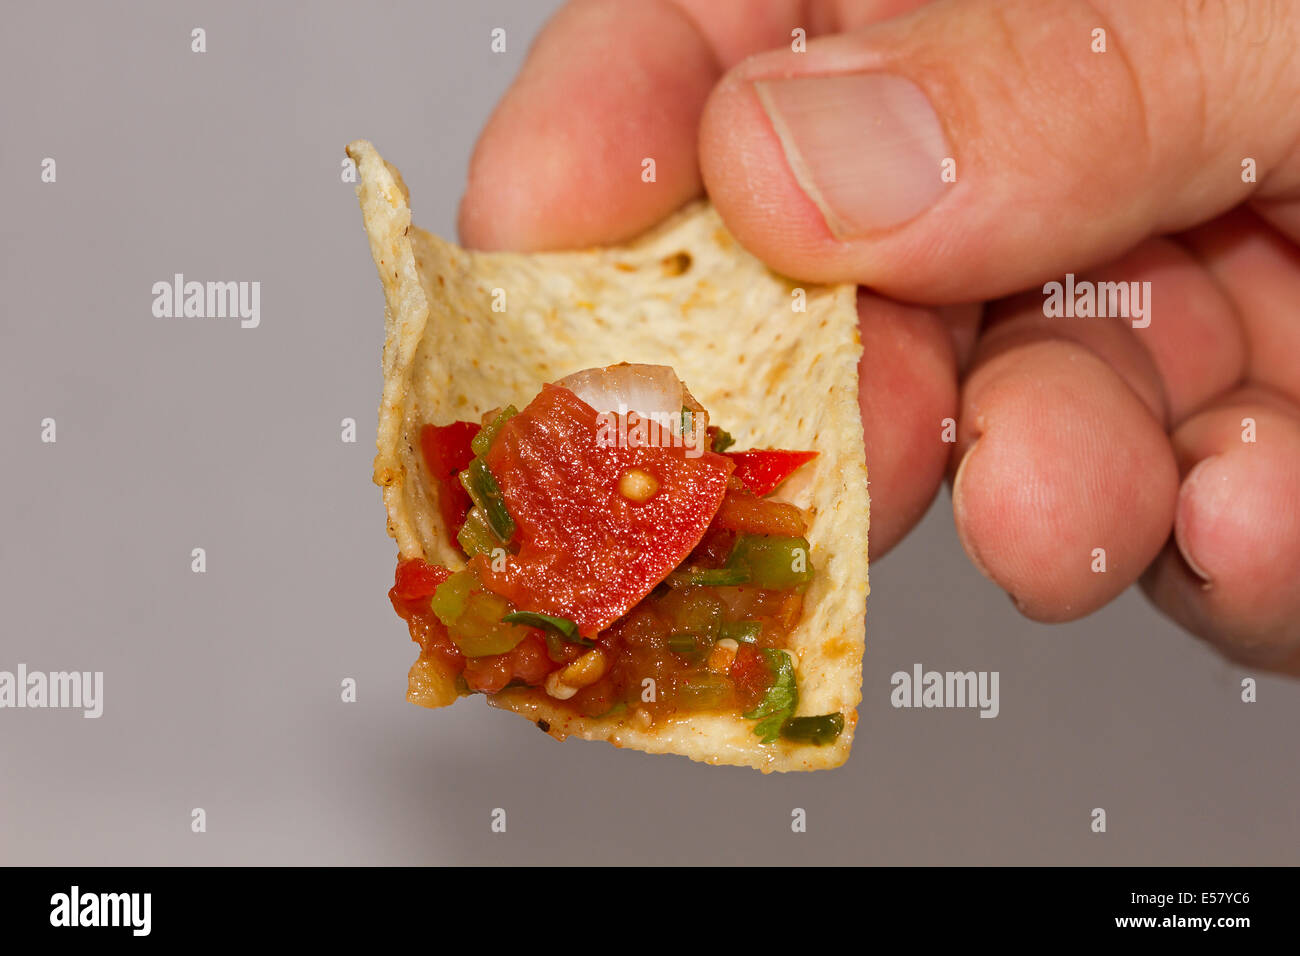 Hand holding tortilla chip and salsa. Stock Photo